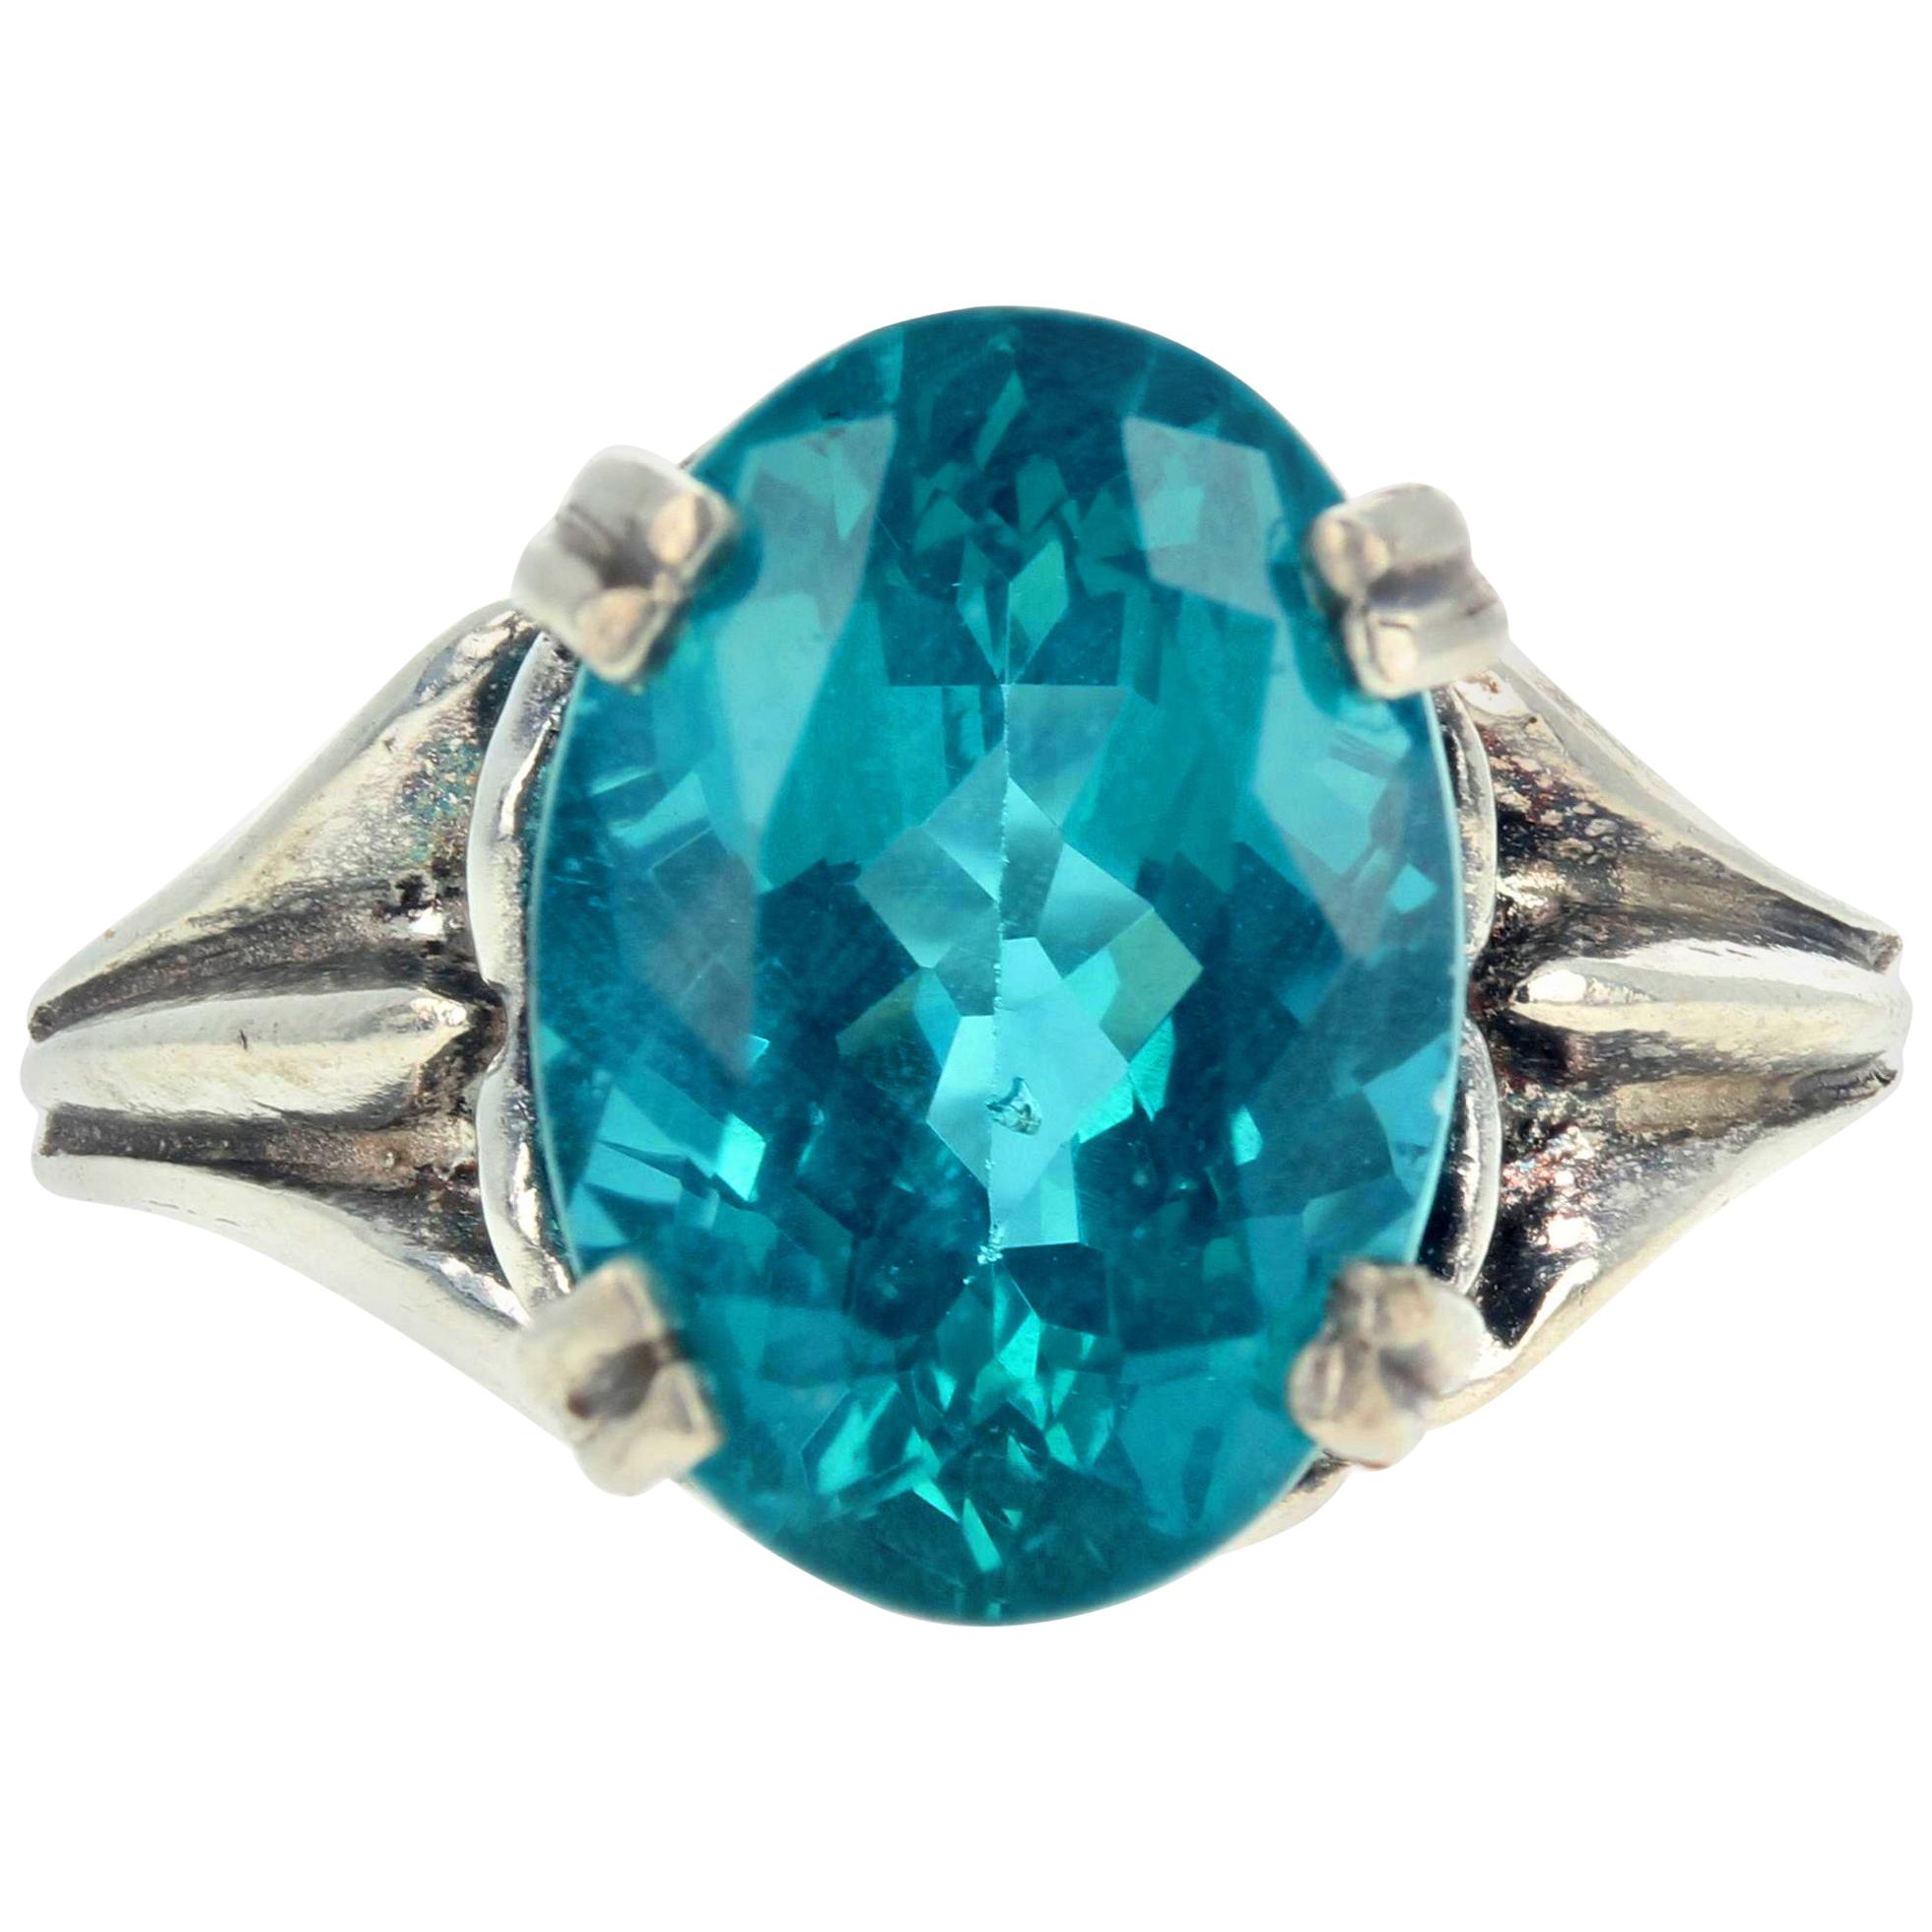 AJD Elegant Fiery Intense Turquoise Blue 5.7 Ct. Real Apatite Silver Ring